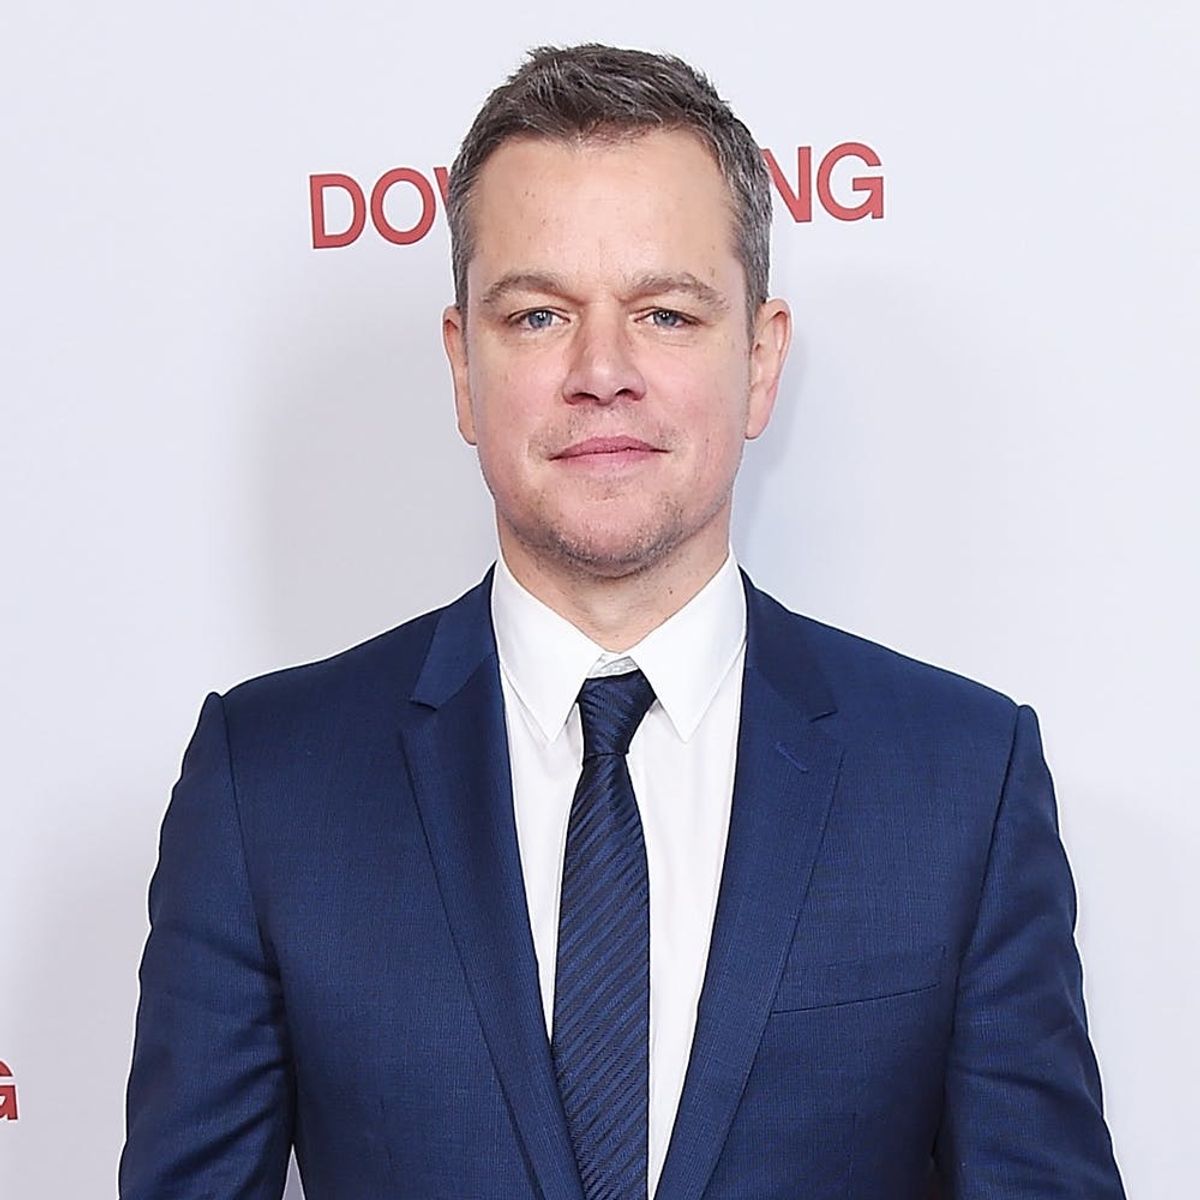 Matt Damon Is Facing Some Serious Backlash Over His Comments on Sexual Misconduct